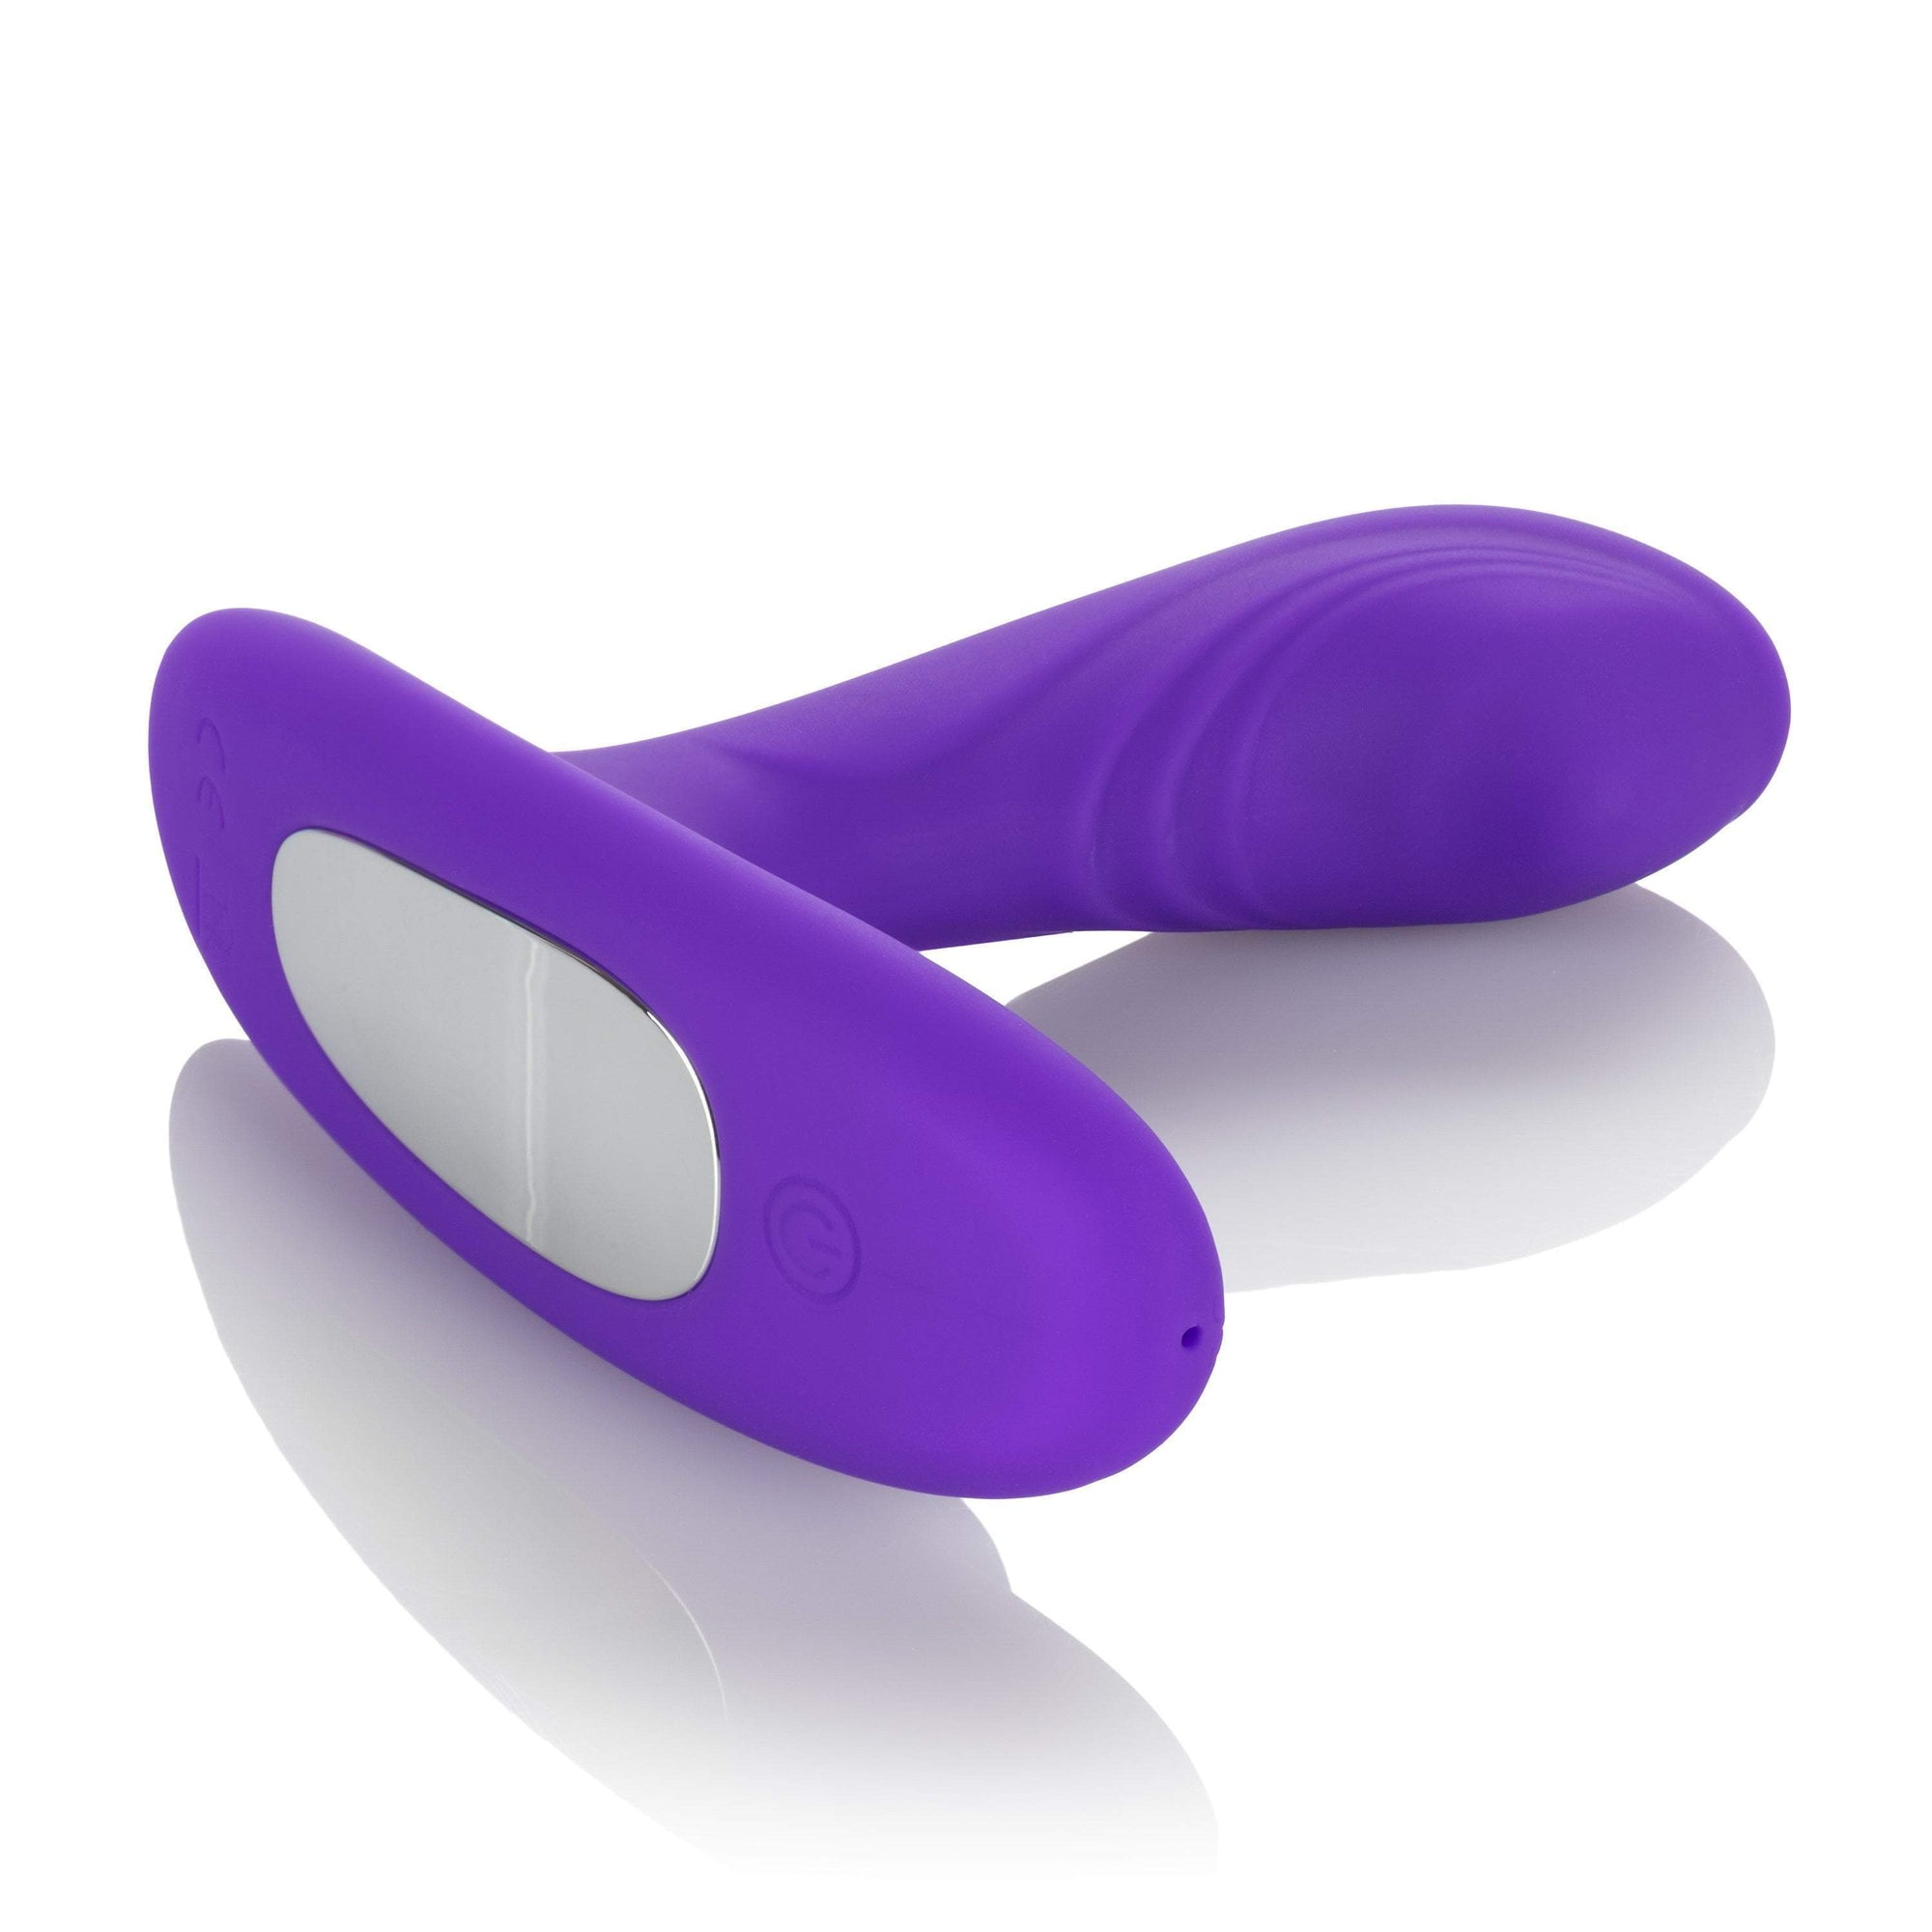 California Exotics - Silicone Remote Pinpoint Pleaser Prostate Massager (Purple) -  Prostate Massager (Vibration) Rechargeable  Durio.sg